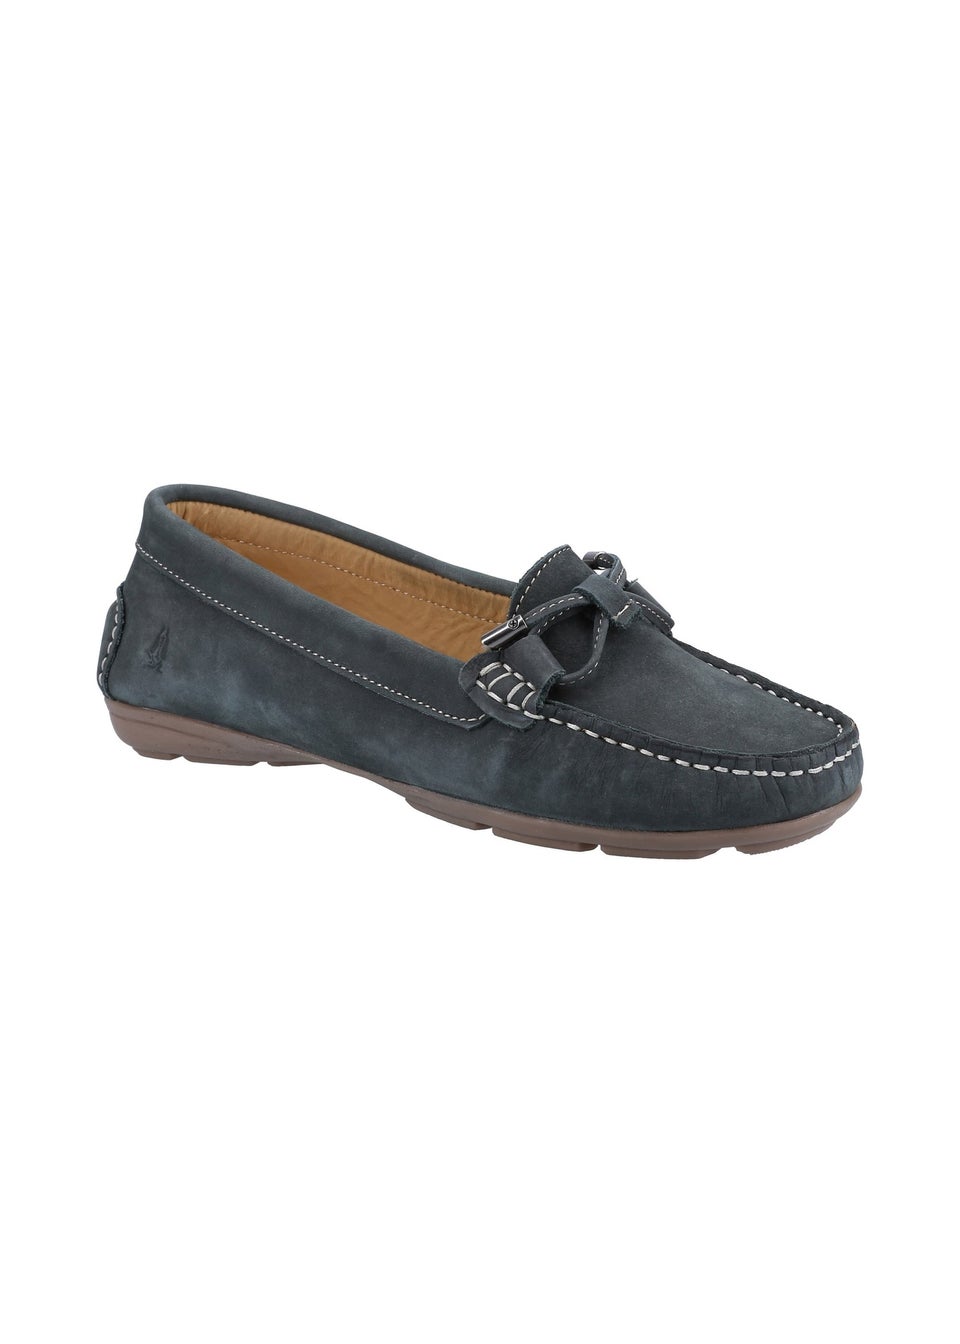 Hush Puppies Navy Maggie Toggle Shoe